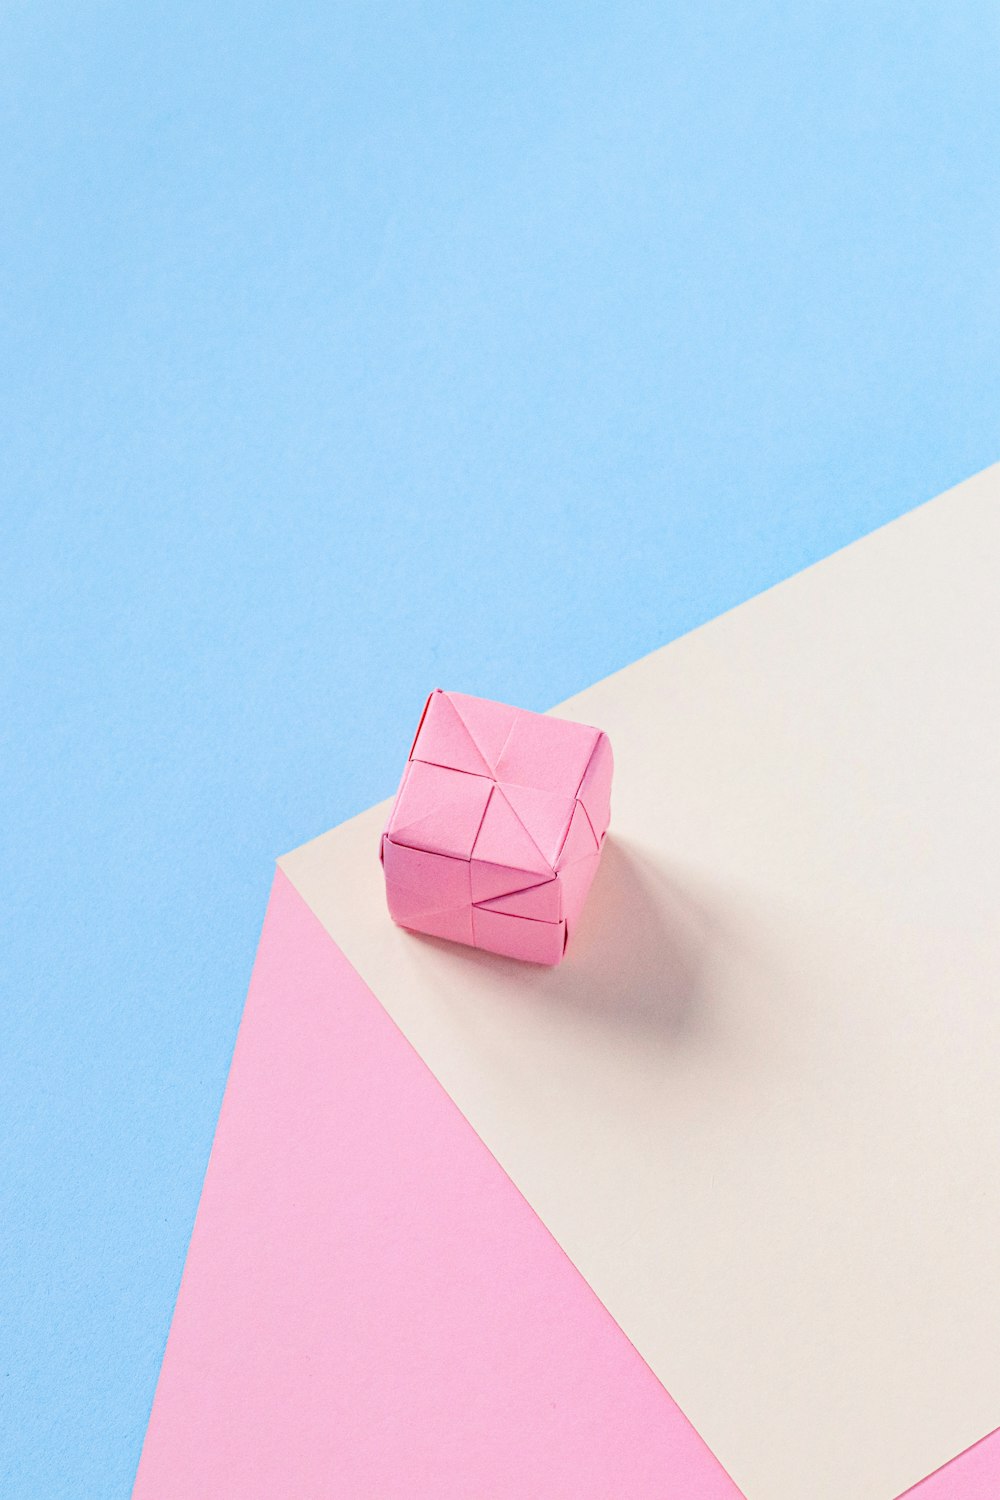 a pink origami object on a blue and pink background